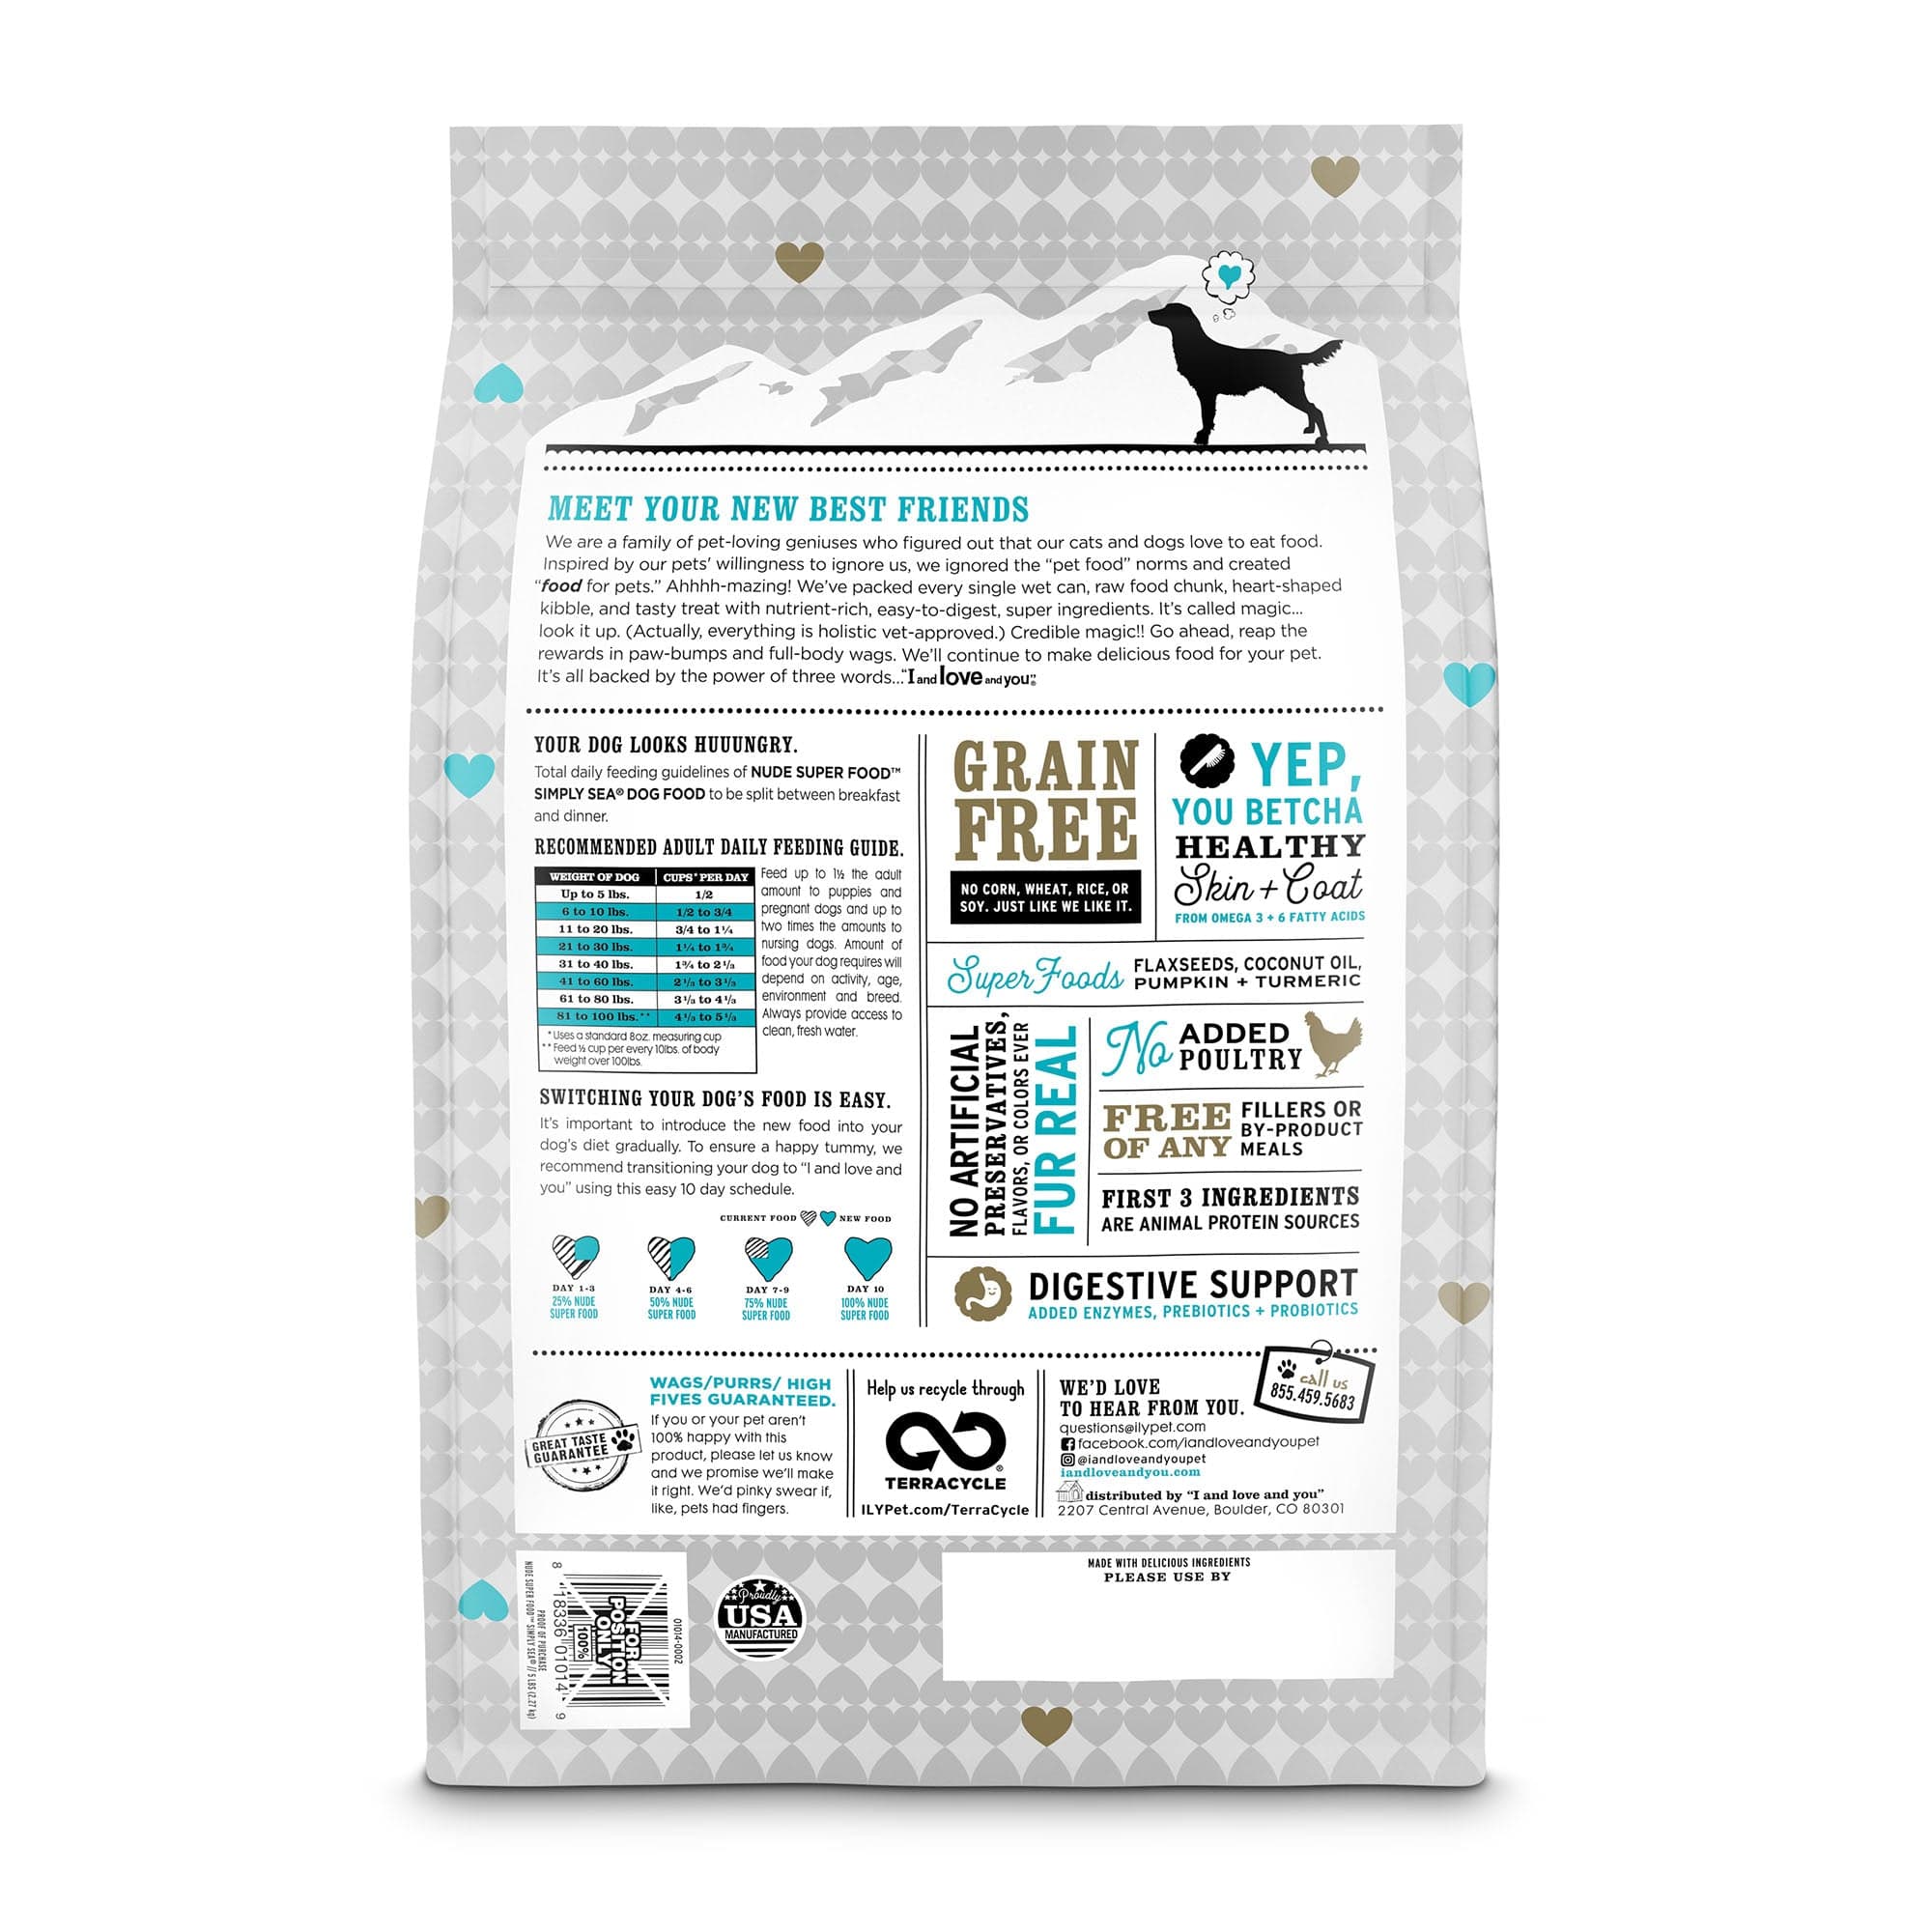 Nude Super Food - Simply Sea bag with high-protein kibble for dogs, featuring a close-up silhouette of a dog and a bag of dog food.